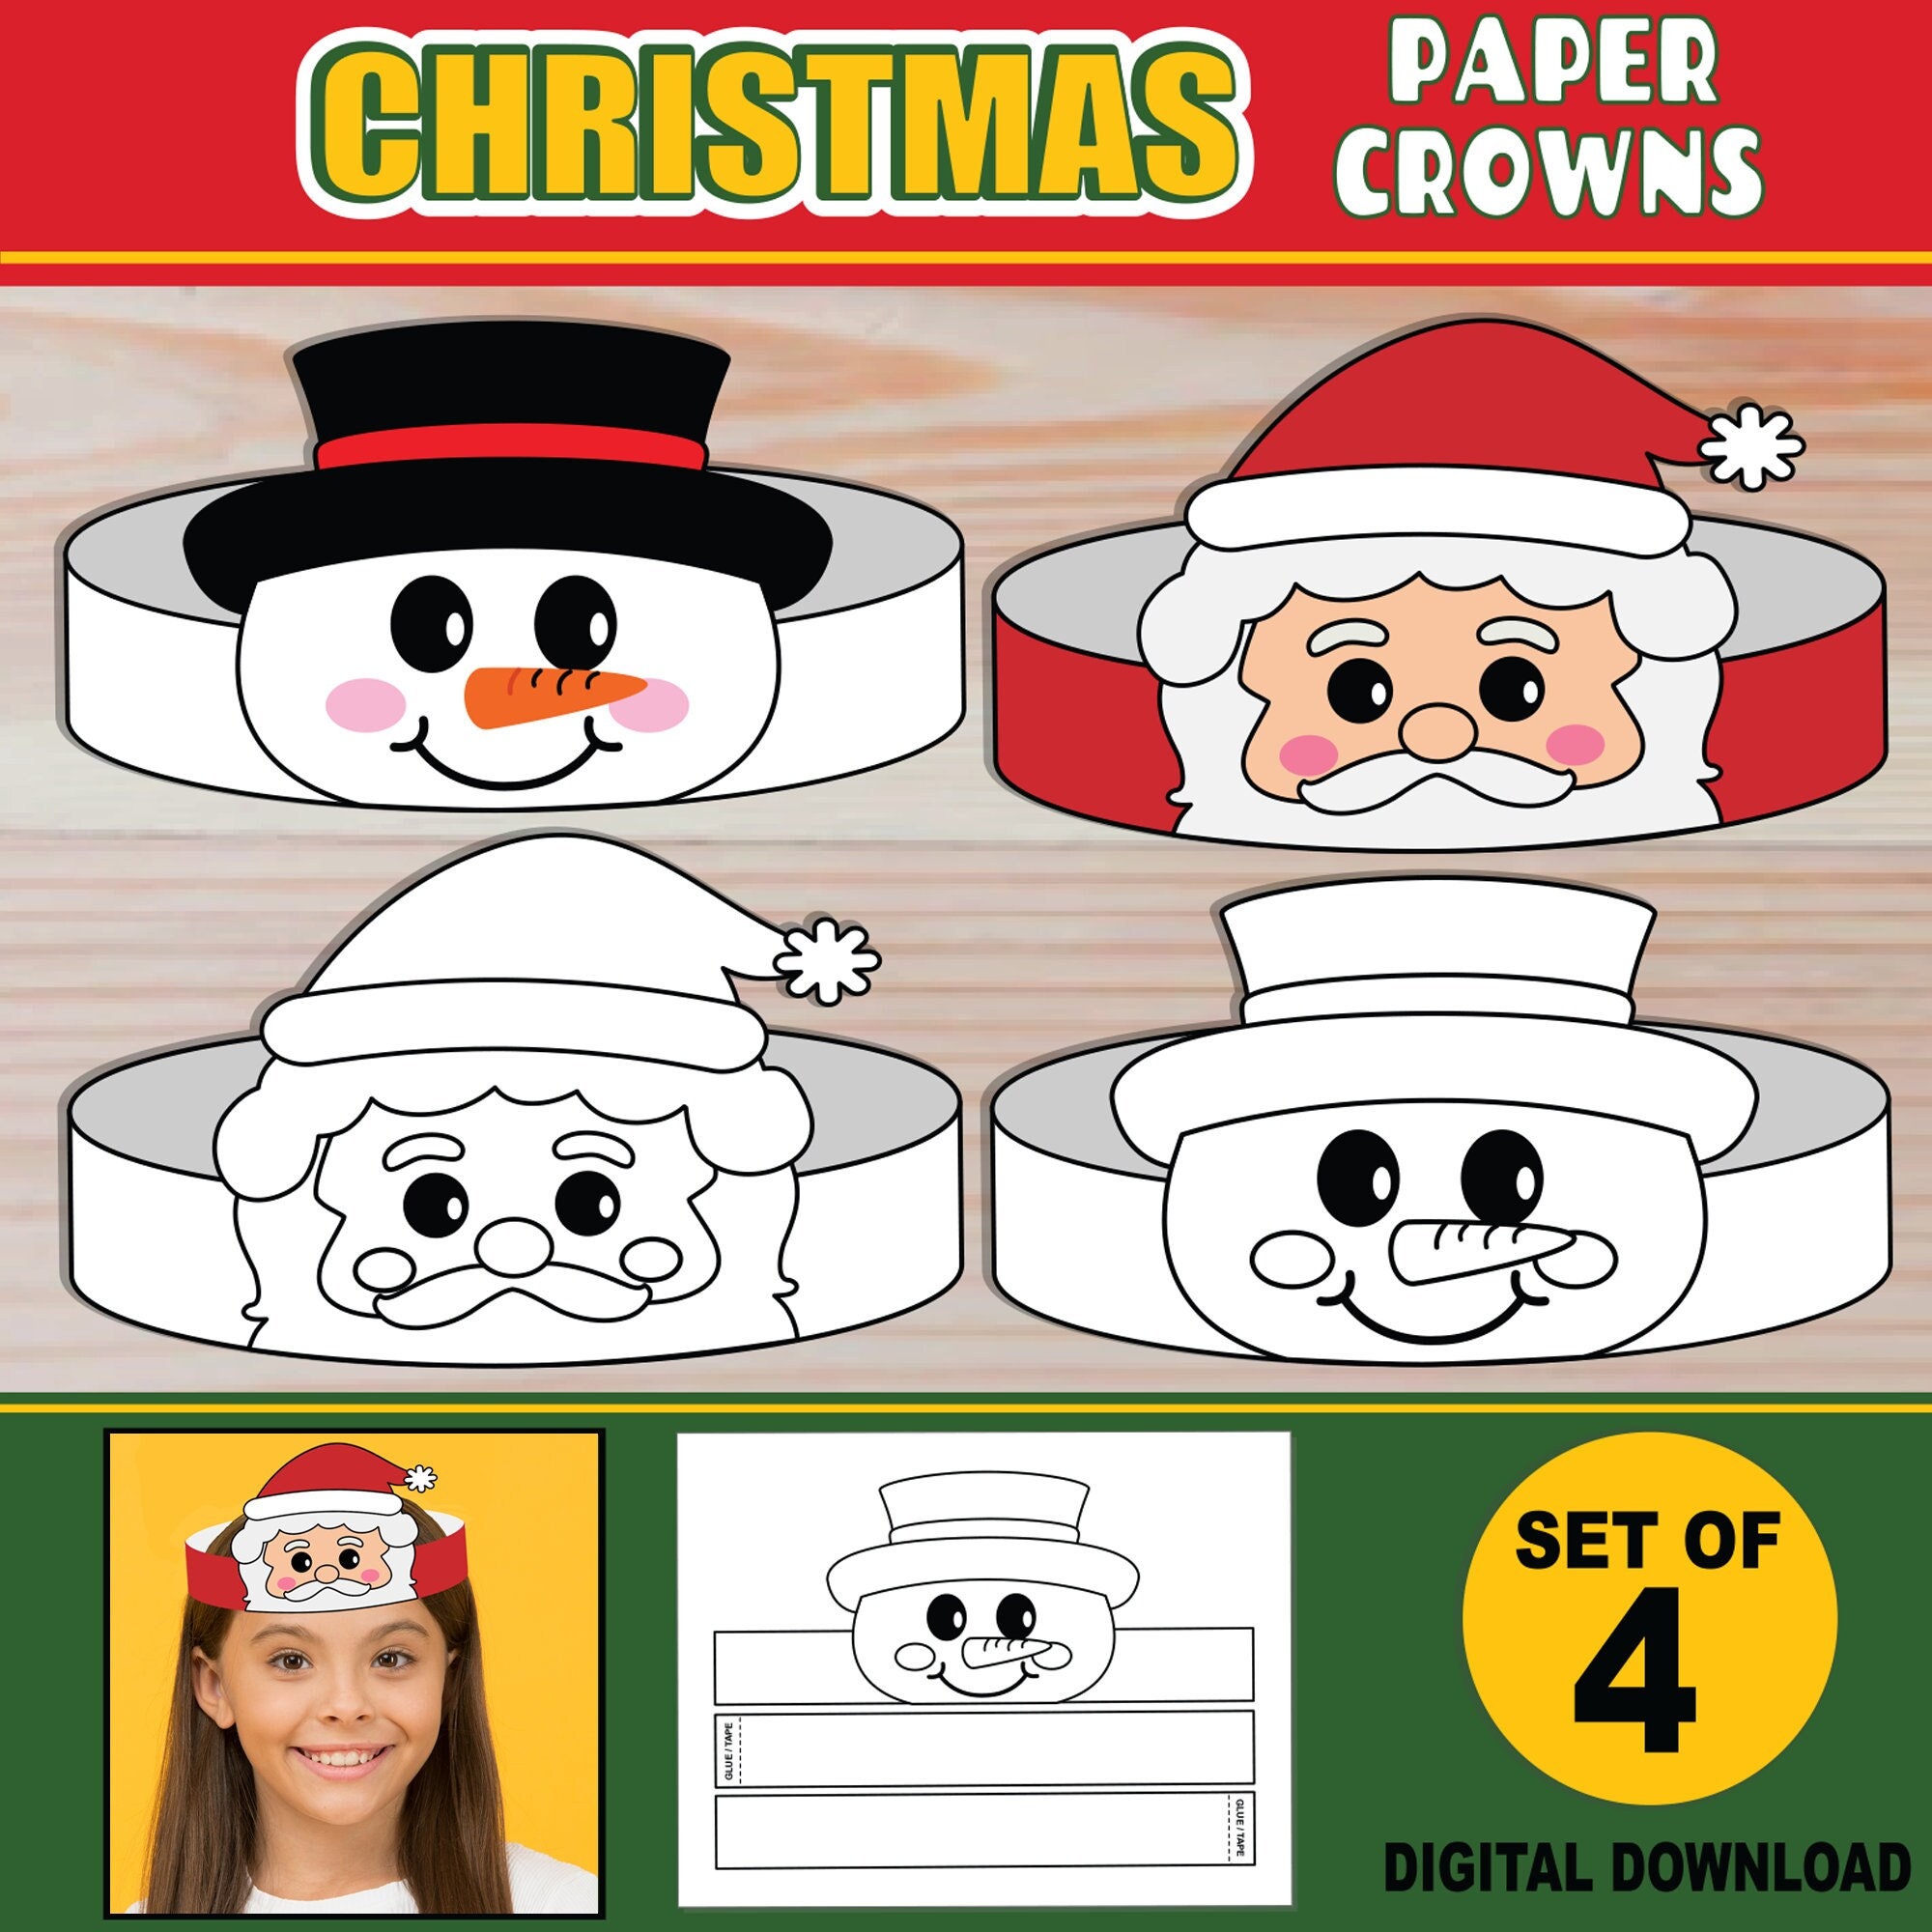 Snowman paper crown, Christmas paper hat for kids, instant download winter  paper crown, Digital party headband, printable party mask